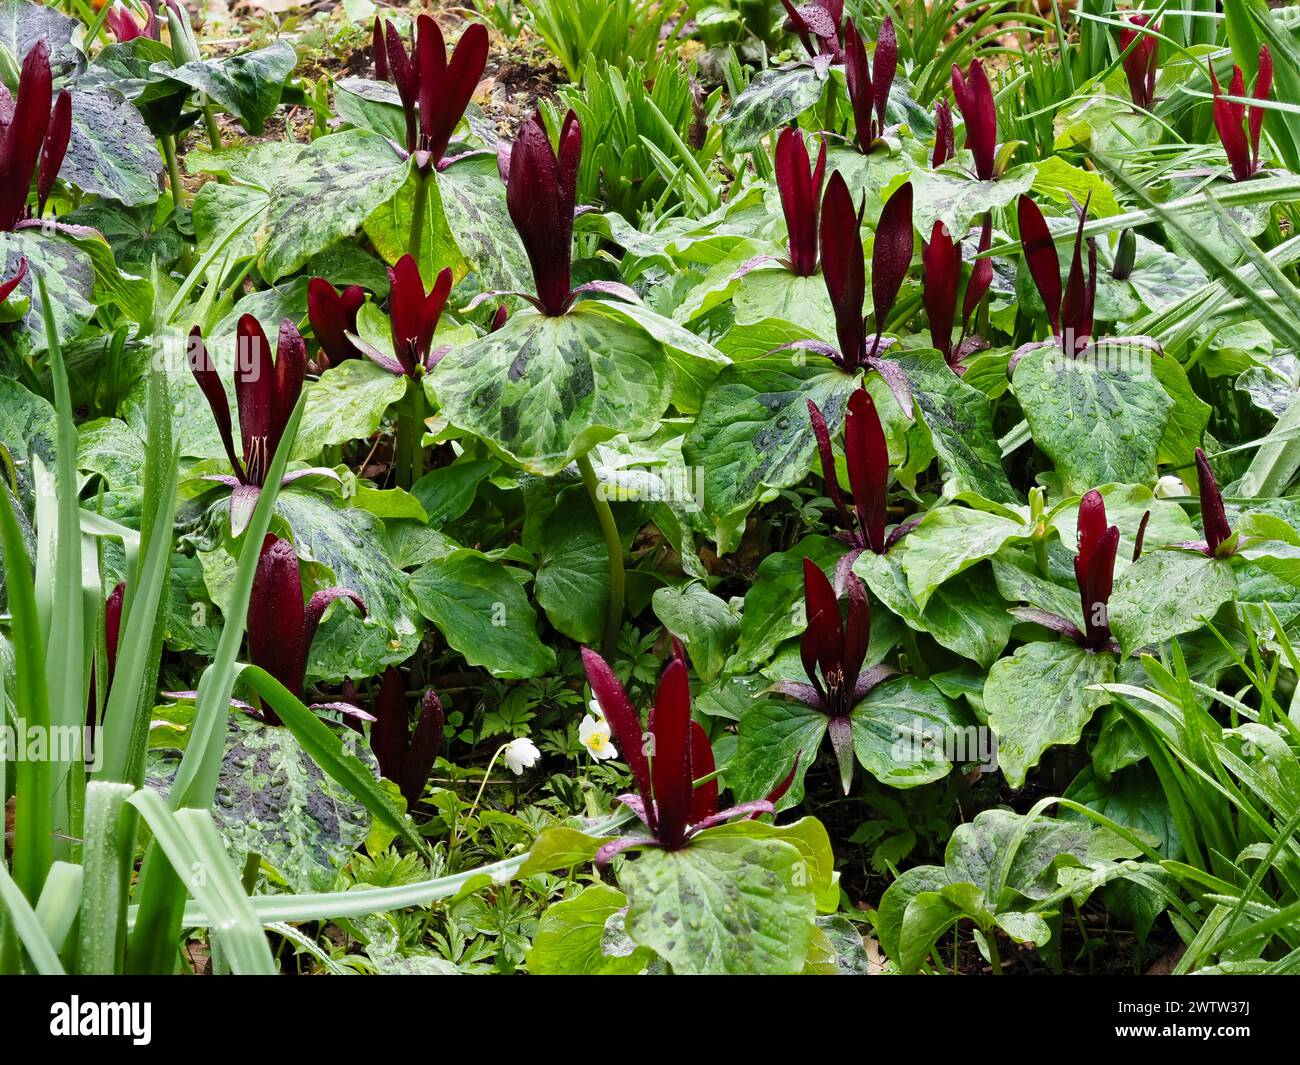 Red flowers of the spring blooming hardy corm, Trillium chloropetalum 'Rubrum', stand above the mottled foliage Stock Photo